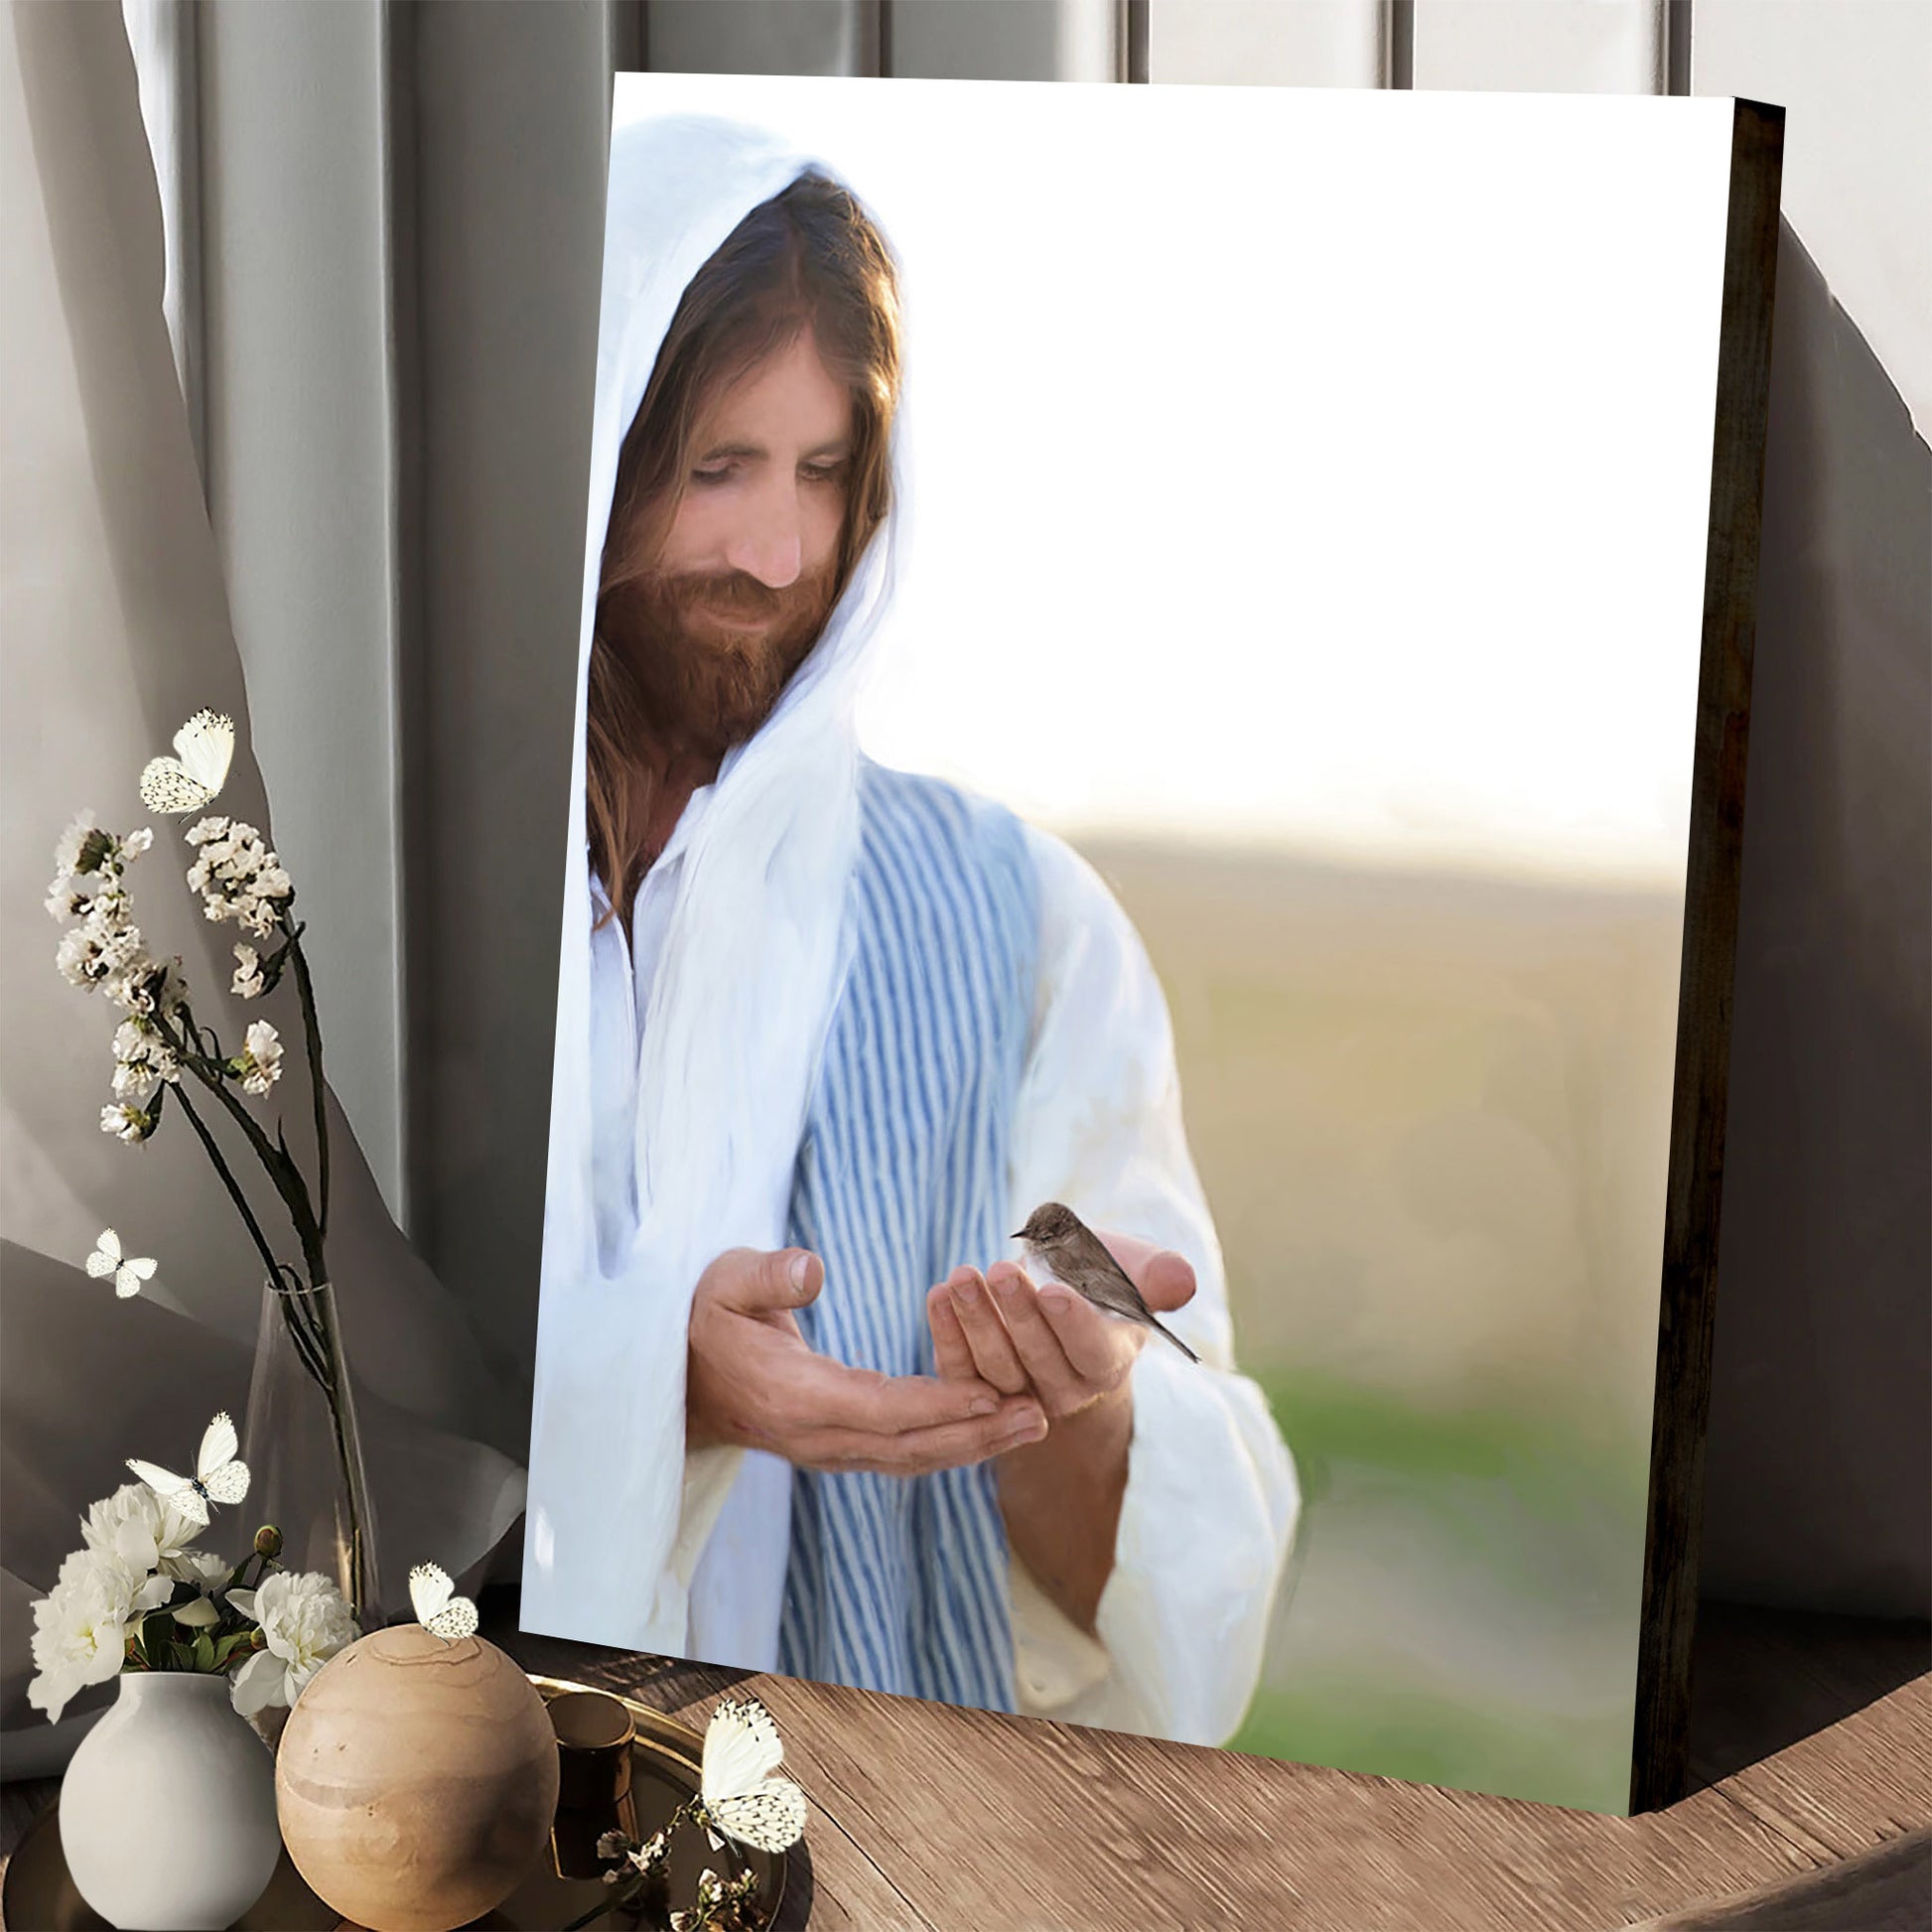 Not One Sparrow Canvas Picture - Jesus Christ Canvas Art - Christian Wall Canvas